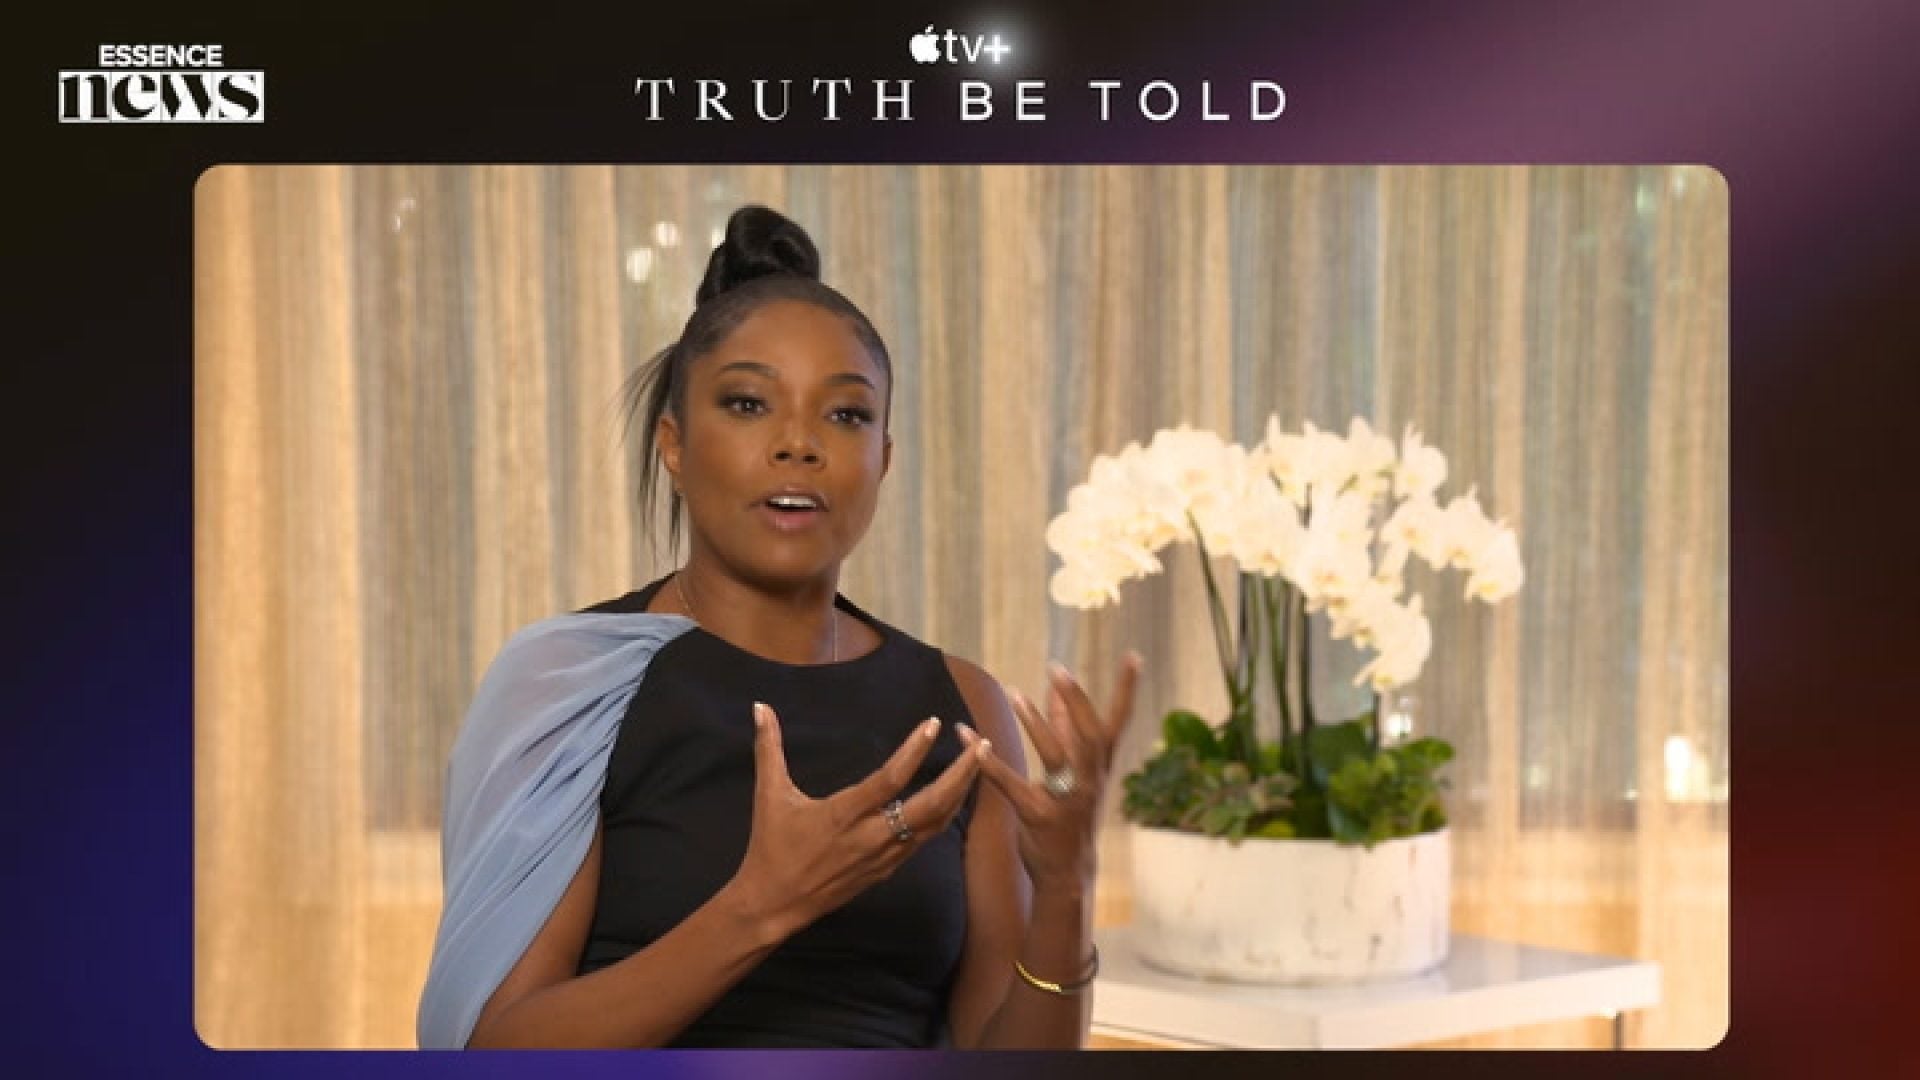 WATCH: Gabrielle Union Opens Up About Her Journey to Finding Healing